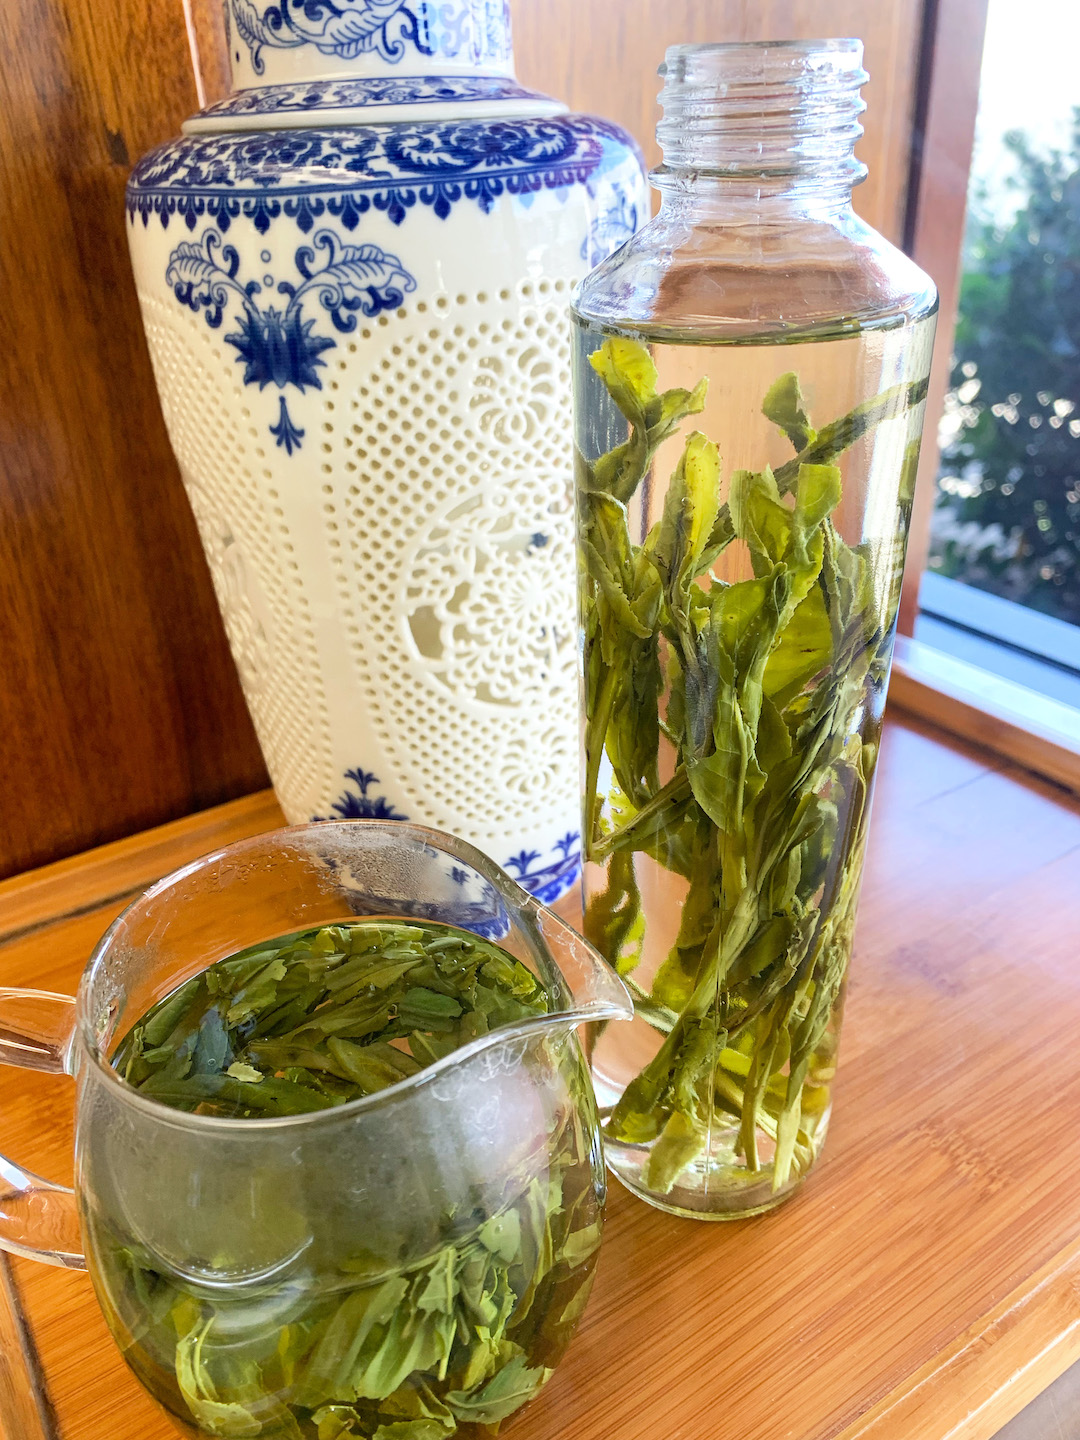 Brewing two green teas in a tall glass bottle filled with very long green leaves and a round squat pitcher with rounded small single leaves dancing in it, set on a wooden tray next to a classical white and blue Chinese vase.